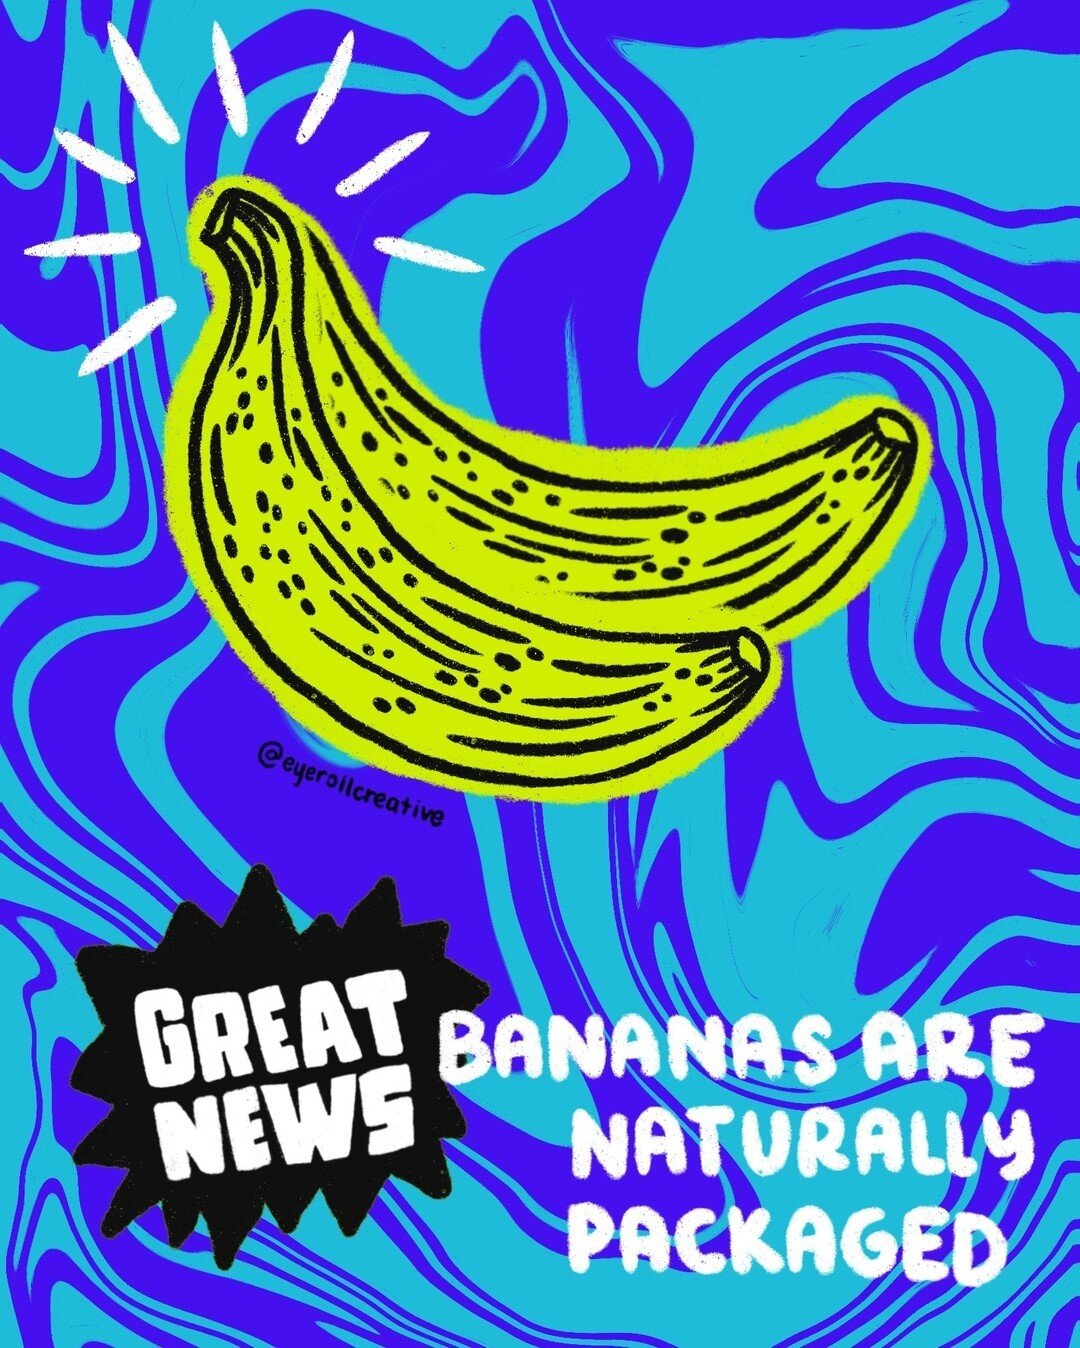 Bananas are packaged by nature for your convenience! ⠀⠀⠀⠀⠀⠀⠀⠀⠀
&bull;⠀⠀⠀⠀⠀⠀⠀⠀⠀
&bull;⠀⠀⠀⠀⠀⠀⠀⠀⠀
&bull;⠀⠀⠀⠀⠀⠀⠀⠀⠀
#TDKpeepshow  #illustrated_now #illustration_daily #illustration_best #visualsnack #instaart #illustrationartists #WeAreMakingMagic #dailyd